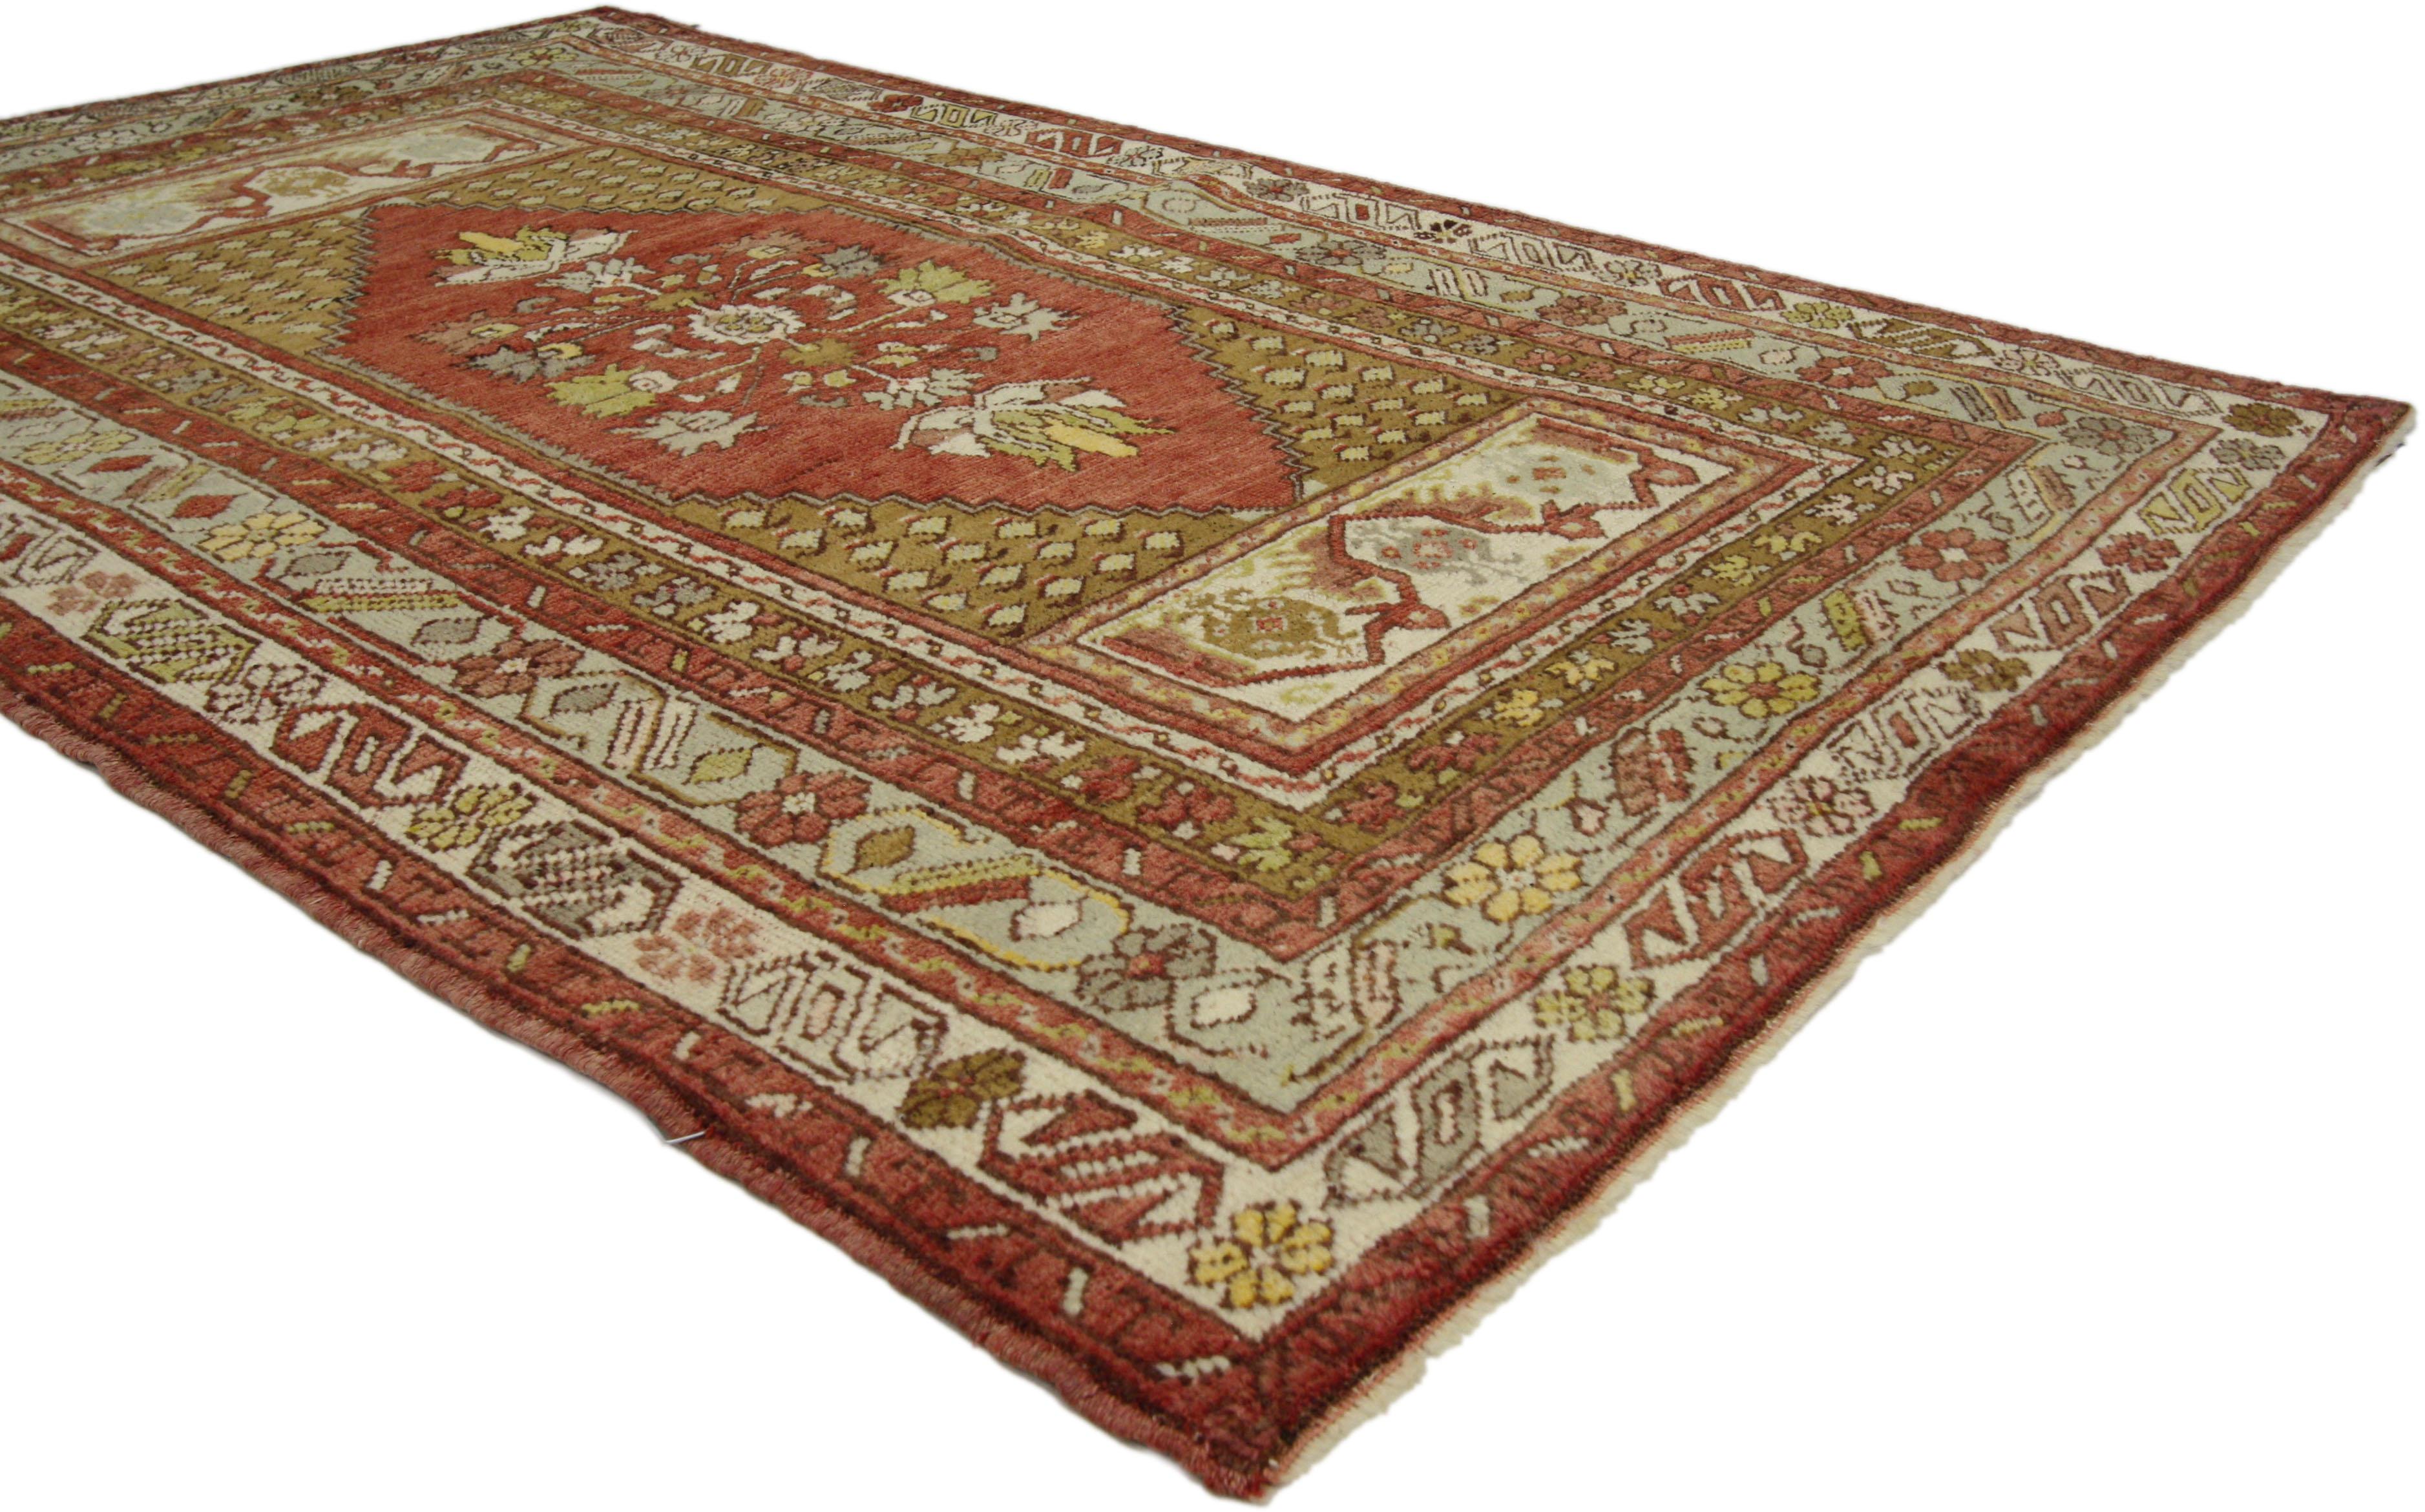 73841 Vintage Turkish Oushak Rug, 03'05 x 05'04. Warm and inviting with traditional style, this hand-knotted wool vintage Turkish Oushak rug features a timeless design surrounded by a classic border. Perfect for a home office, small space, reading